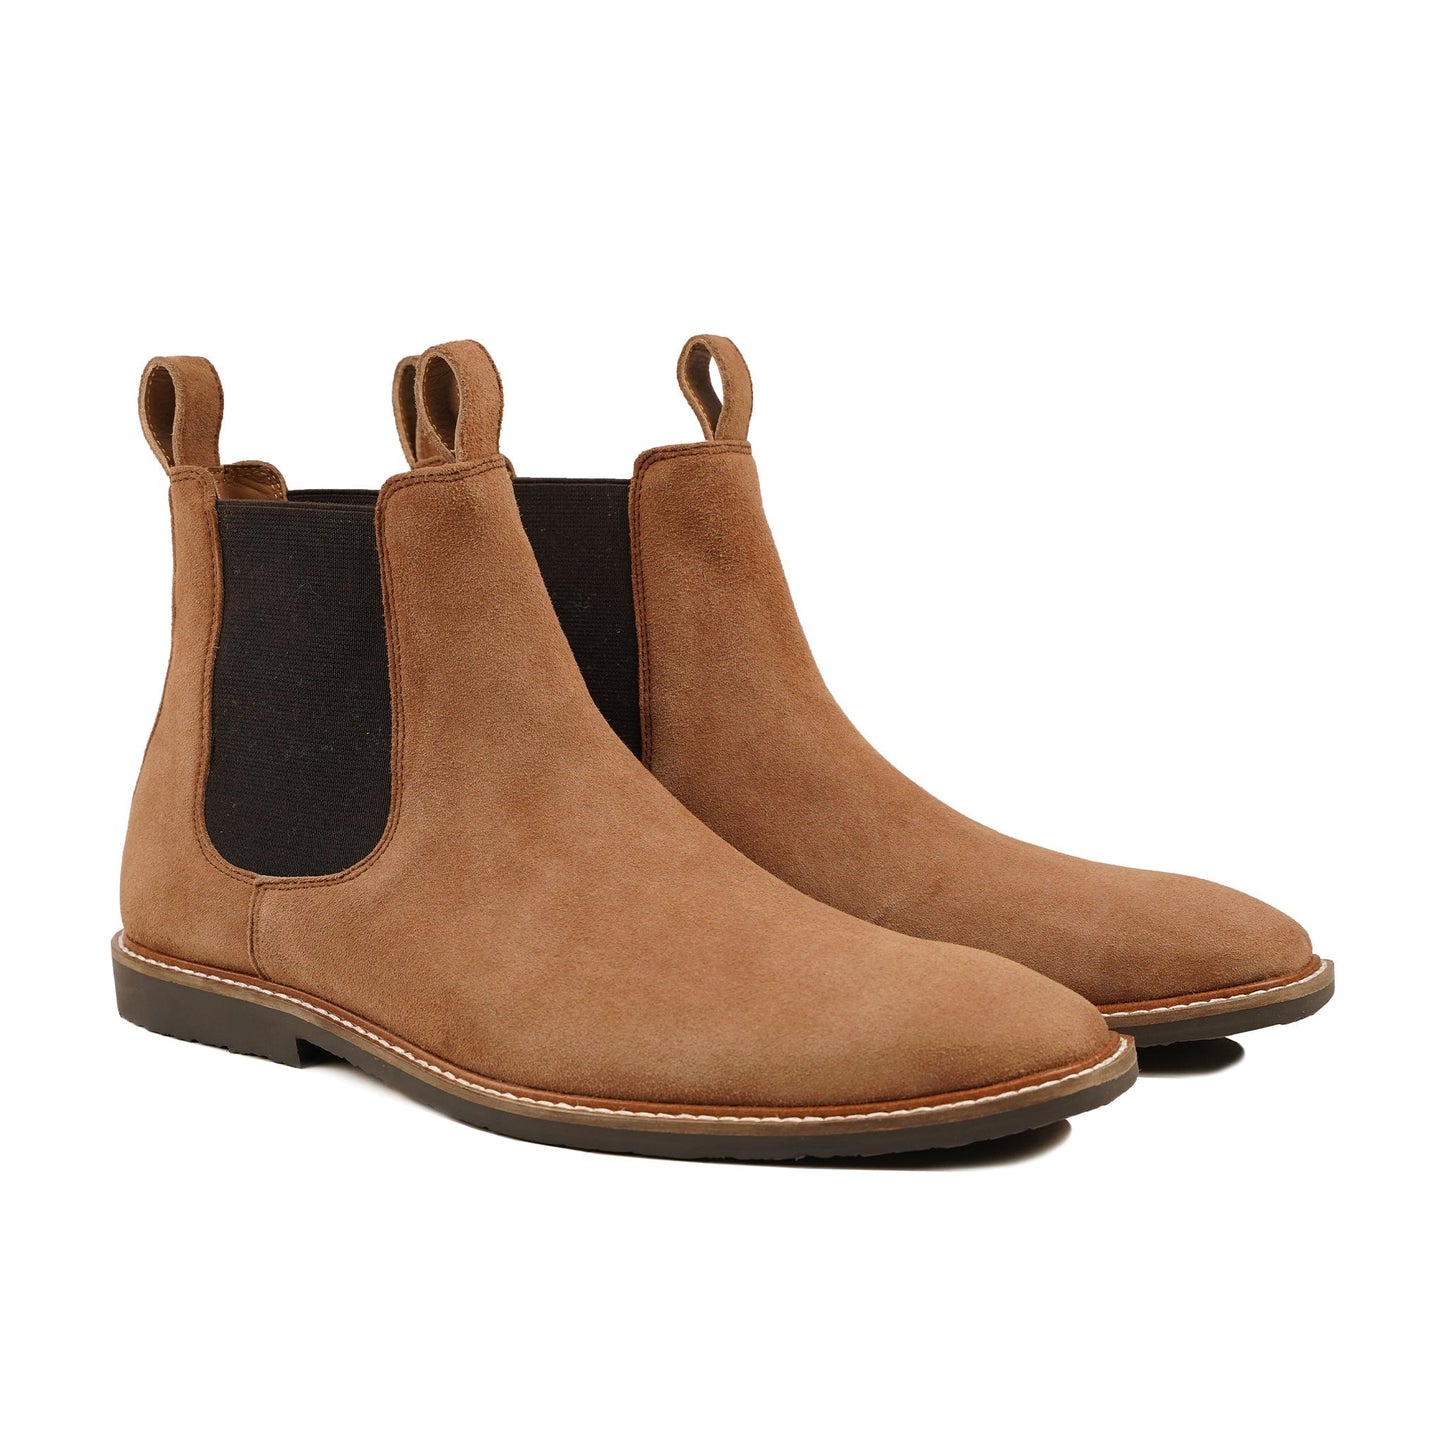 Brown Suede Chelsea With Double Pull Tab Brown Suede Chelsea With Double Pull Tab, Leather Boots